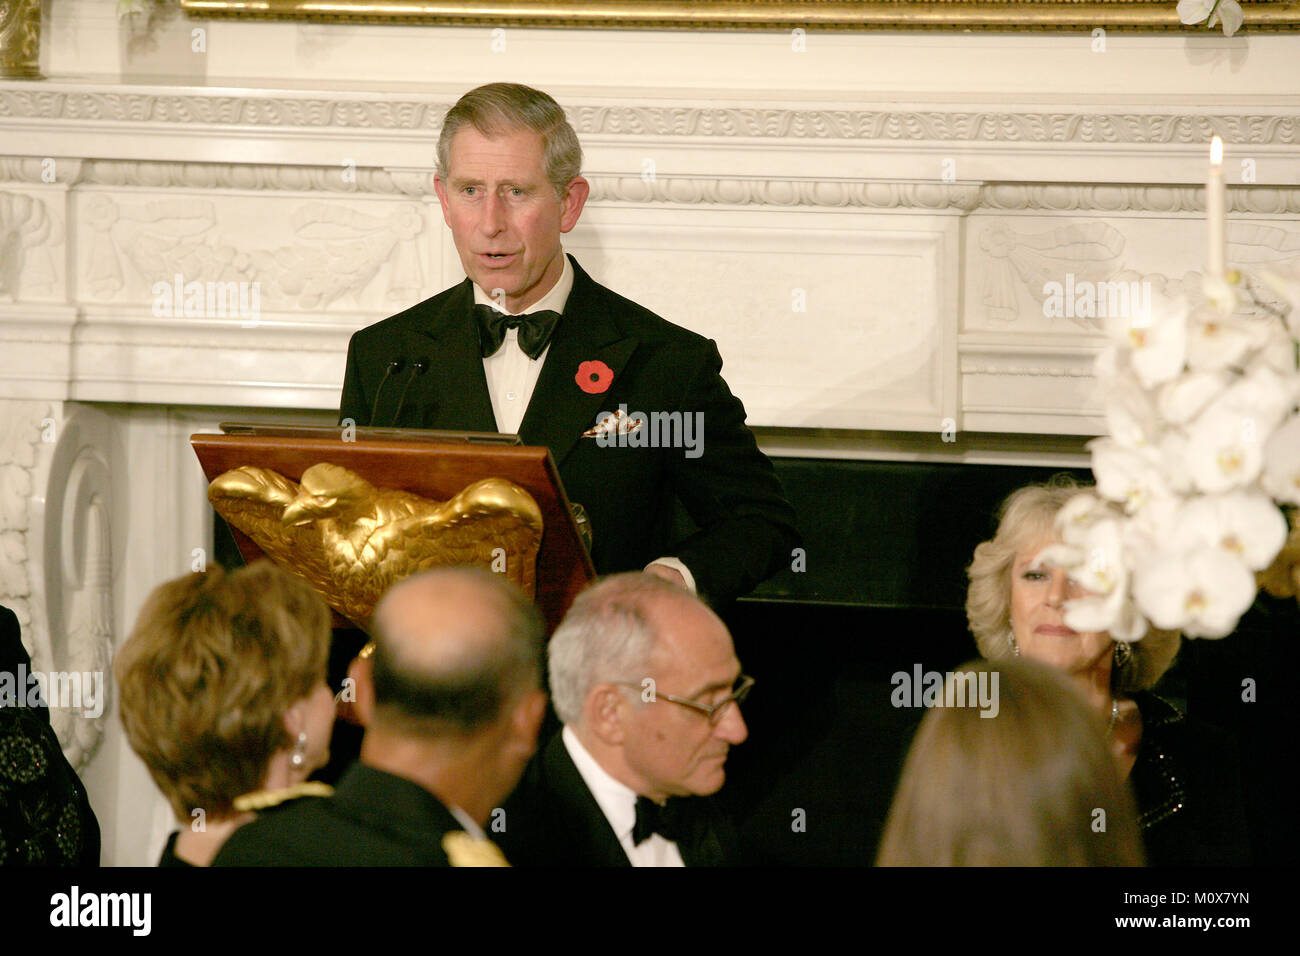 Washington, D.C. - November 2, 2005 -- Charles, Prince of Wales, of Great Britain makes a toast at the start of a Social Dinner in the State Dining Room of the White House in Washington, D.C. on November 2, 2005. The rare black tie dinner was held by President George W. Bush to honor Prince Charles and his wife, Camilla, Duchess of Cornwall, who are on an eight-day visit to the United States. .Credit: Jay L. Clendenin - Pool via CNP.(Restriction: No New York Metro or other Newspapers within a 75 mile radius of New York City)/ MediaPunch Stock Photo